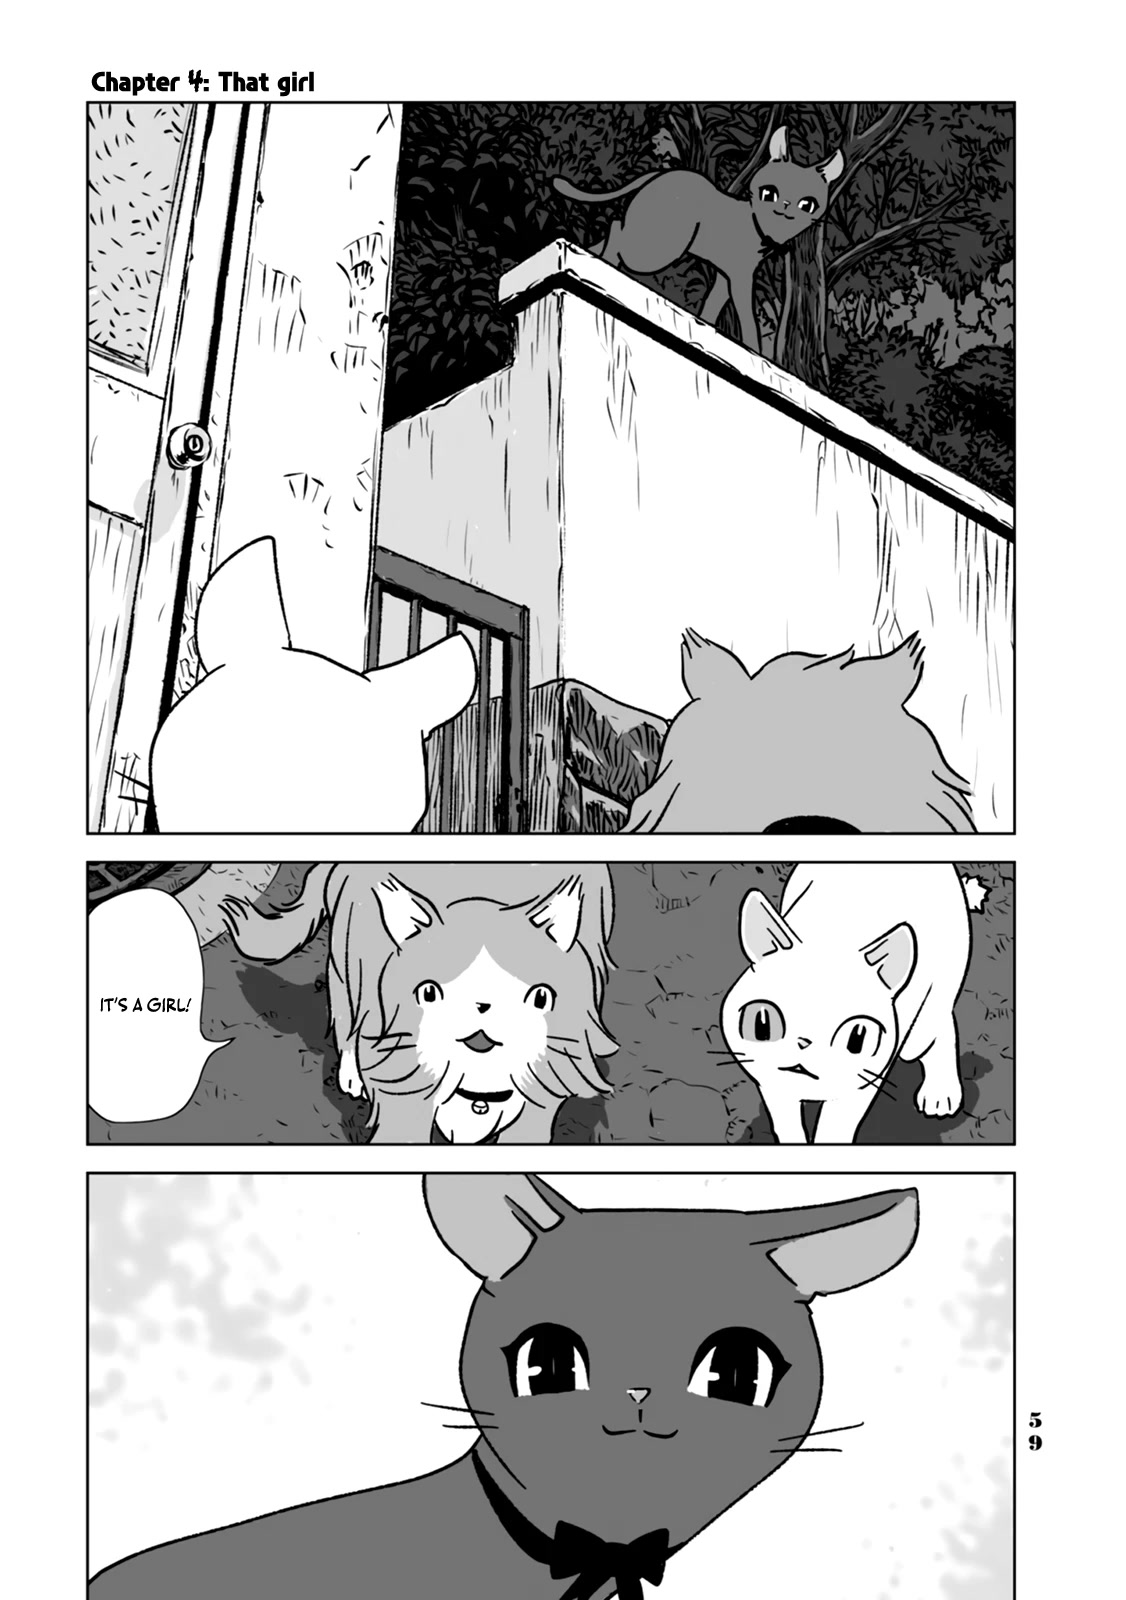 No Cats Were Harmed In This Comic. - Page 1